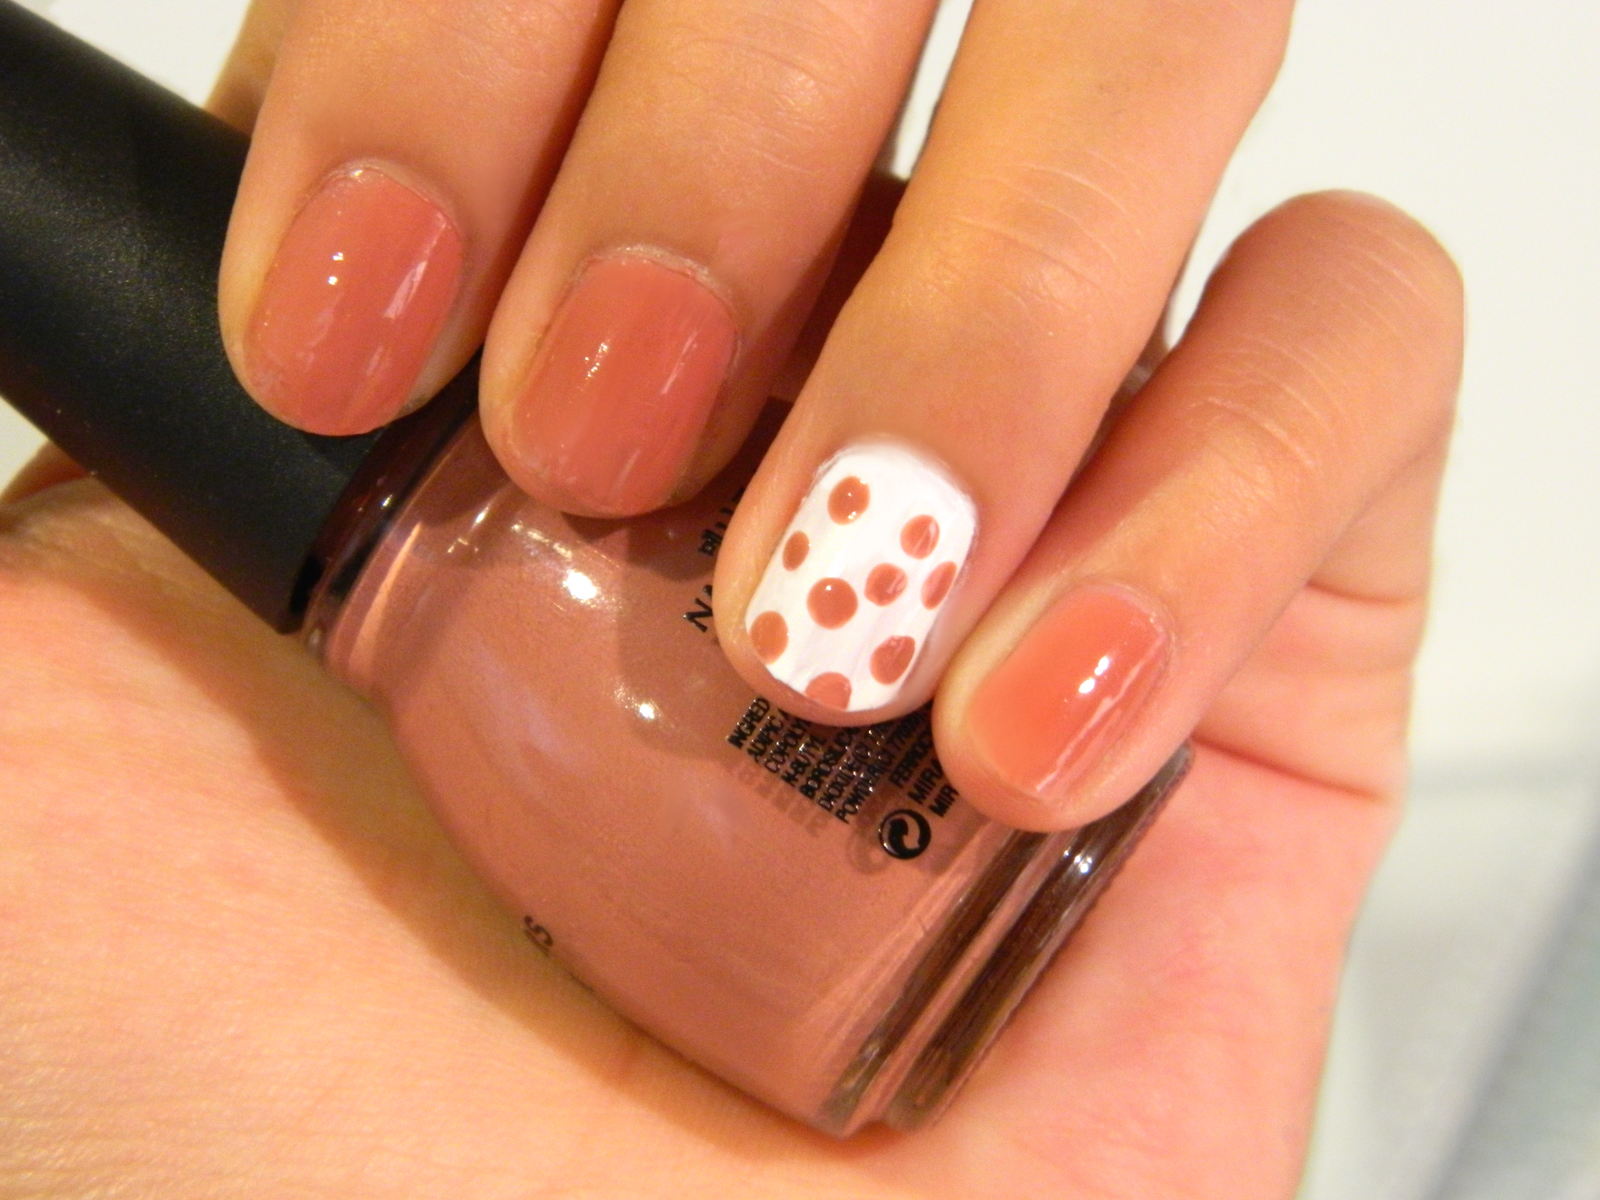 Polka Dot Nail Art Designs Without Tools for Beginners - wide 4